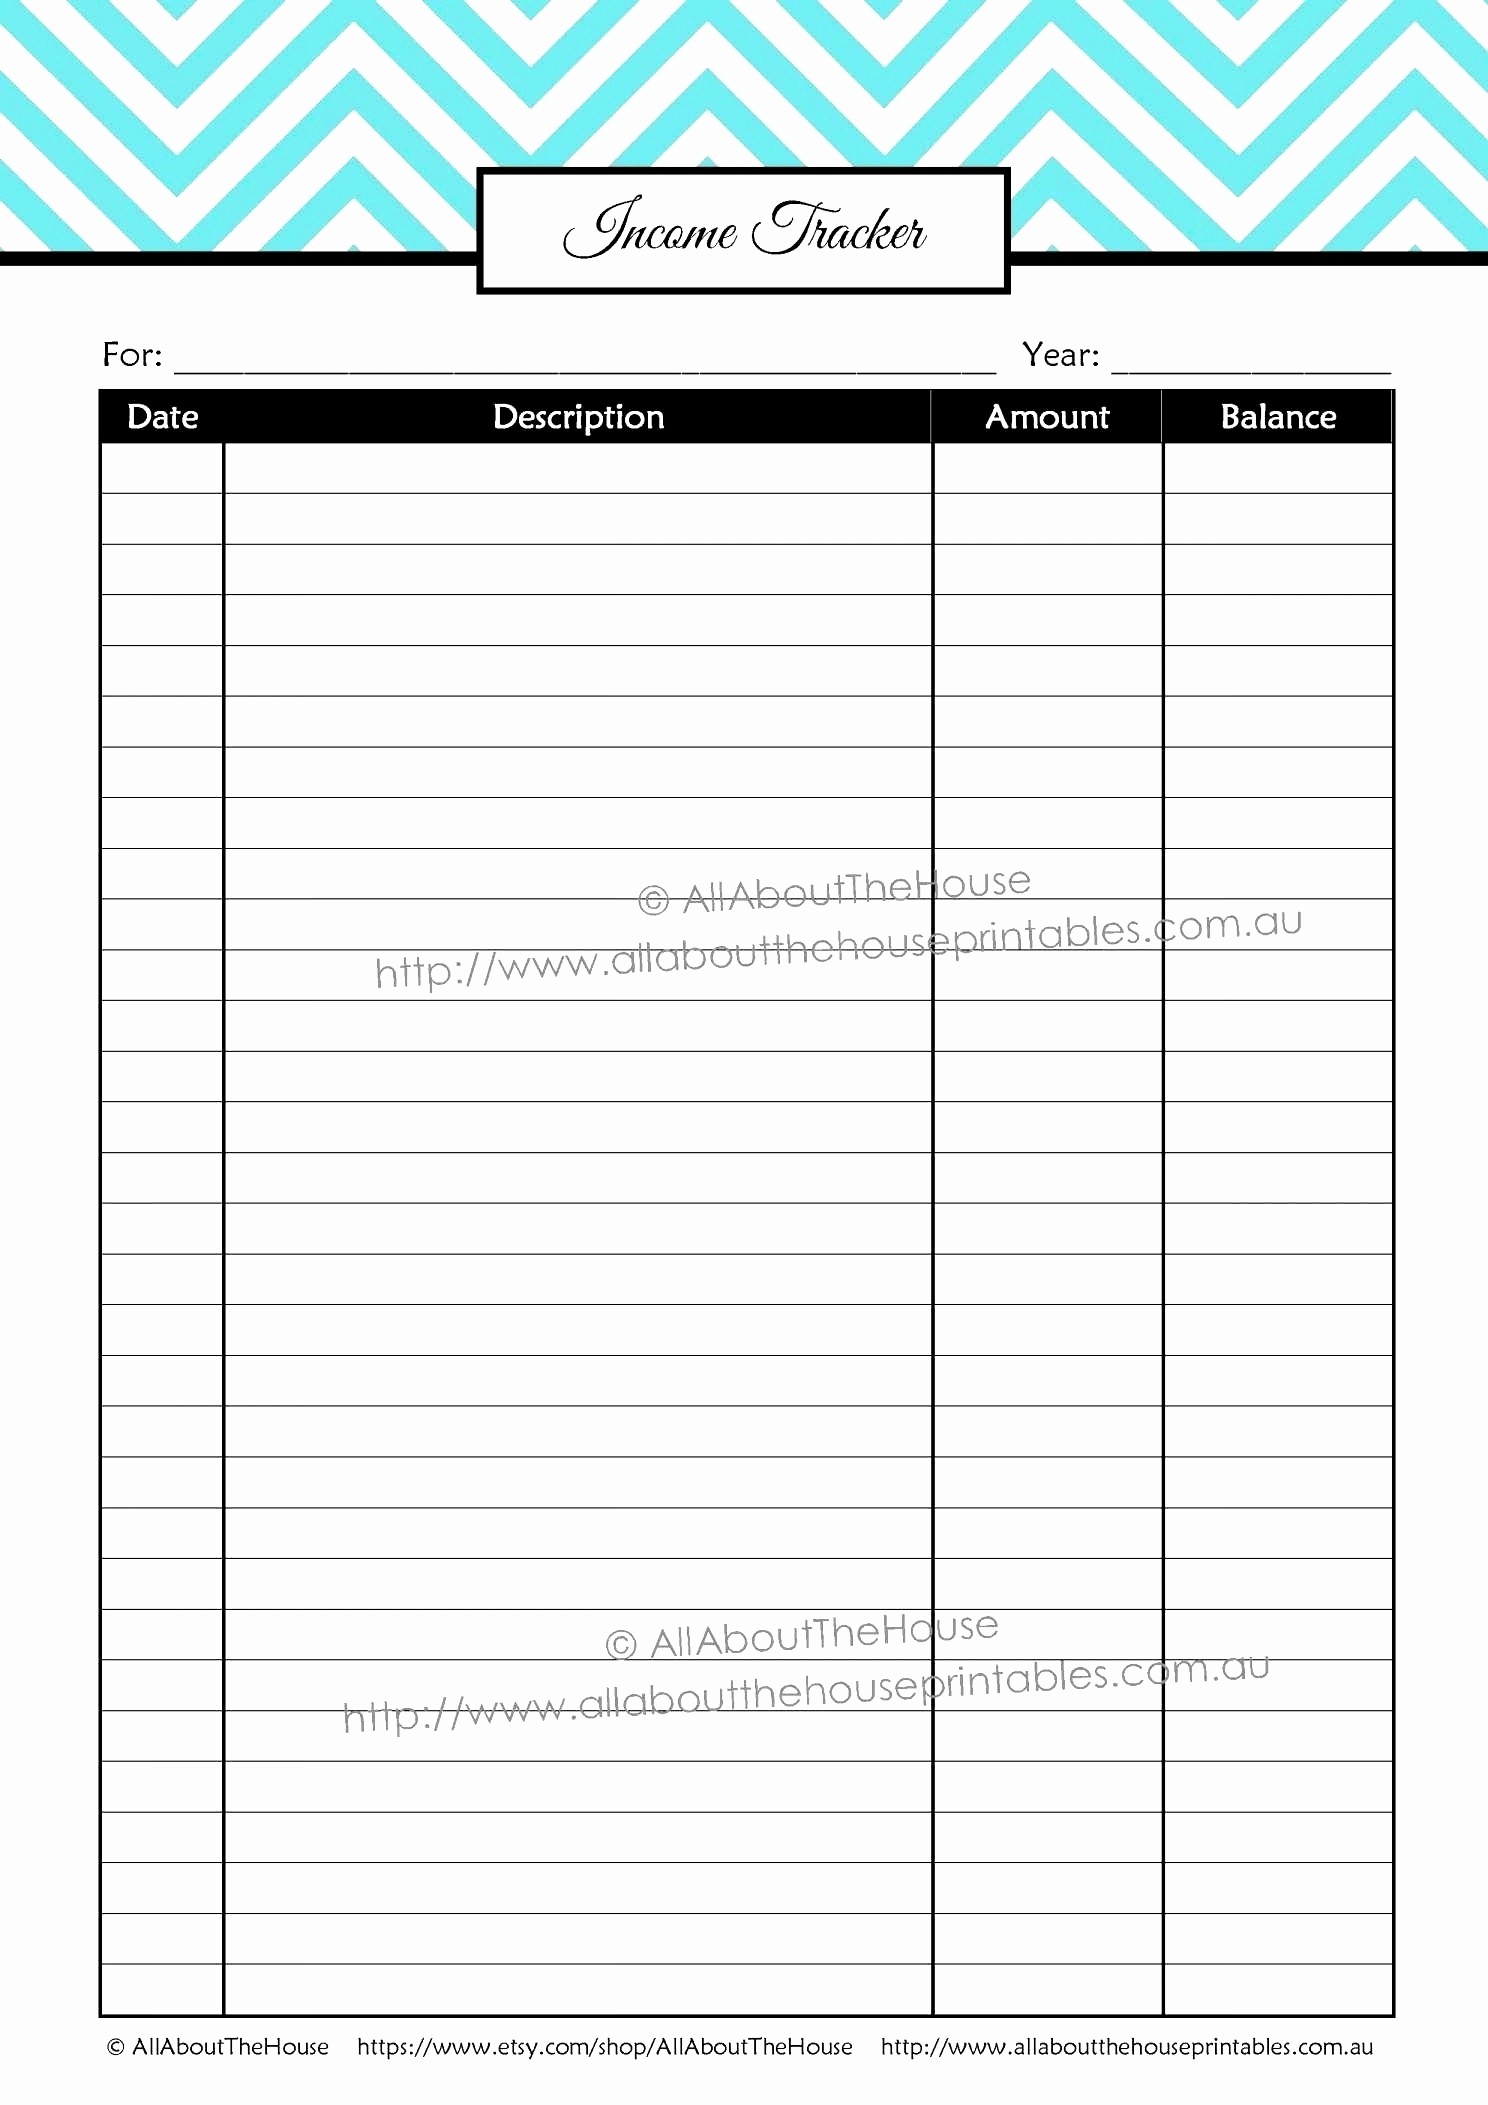 Material List For Building A House Spreadsheet Luxury Construction Document Takeoff Excel